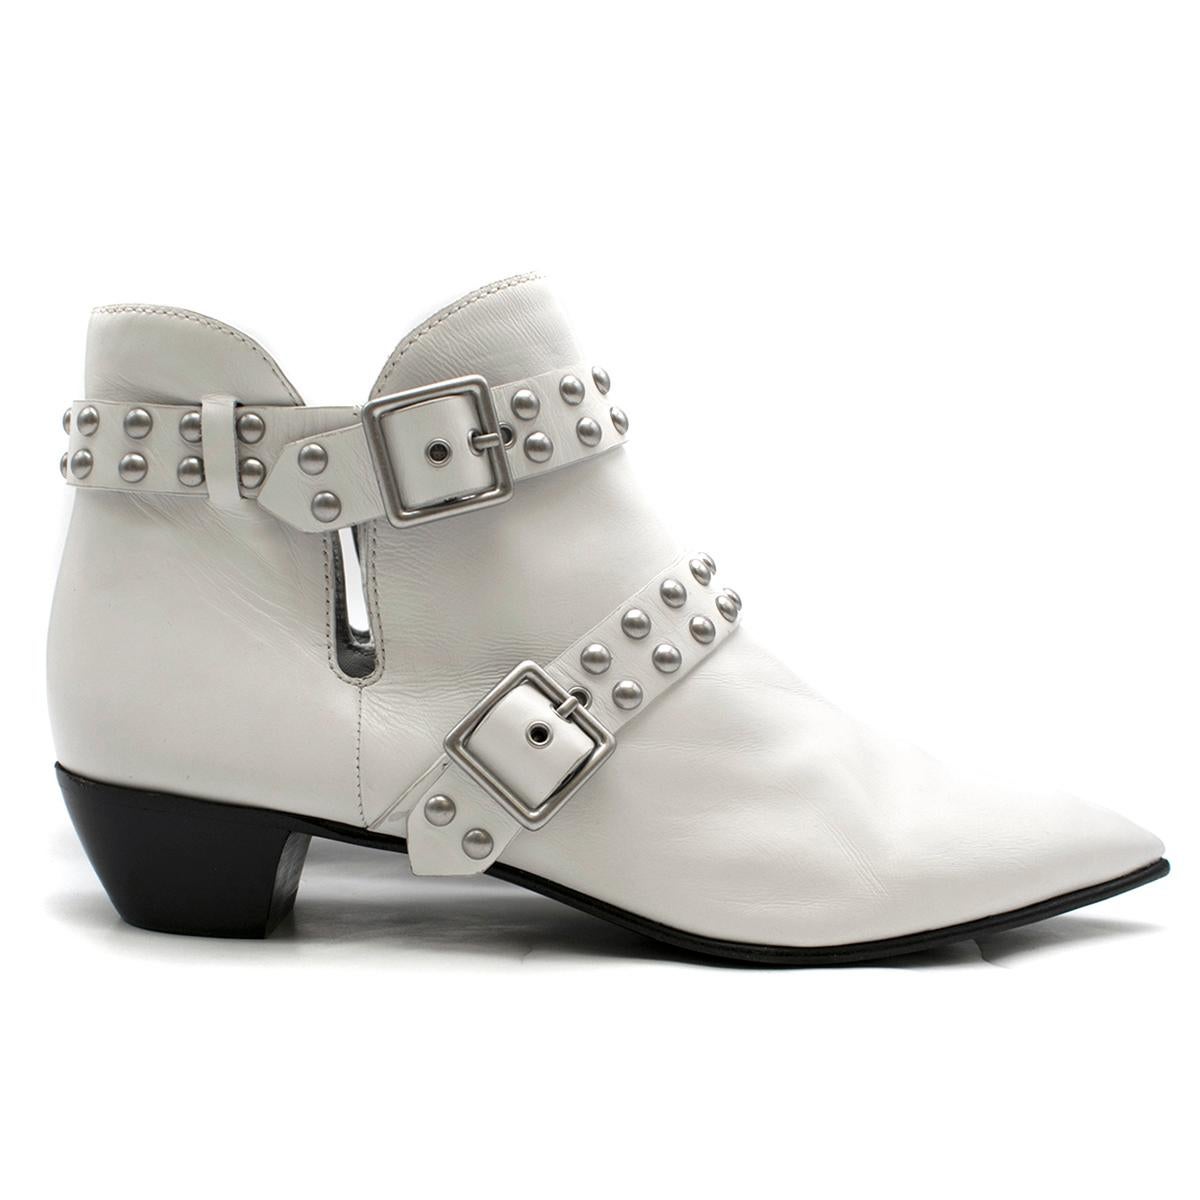 Marc by Marc Jacobs Carroll White Leather Studded Ankle Boots

- Carroll ankle boots in white
- pointy toe
- two buckles studded straps detailed across the vamps
- pull on 
- block heel
- leather insole and sole

This shoes show very light signs of